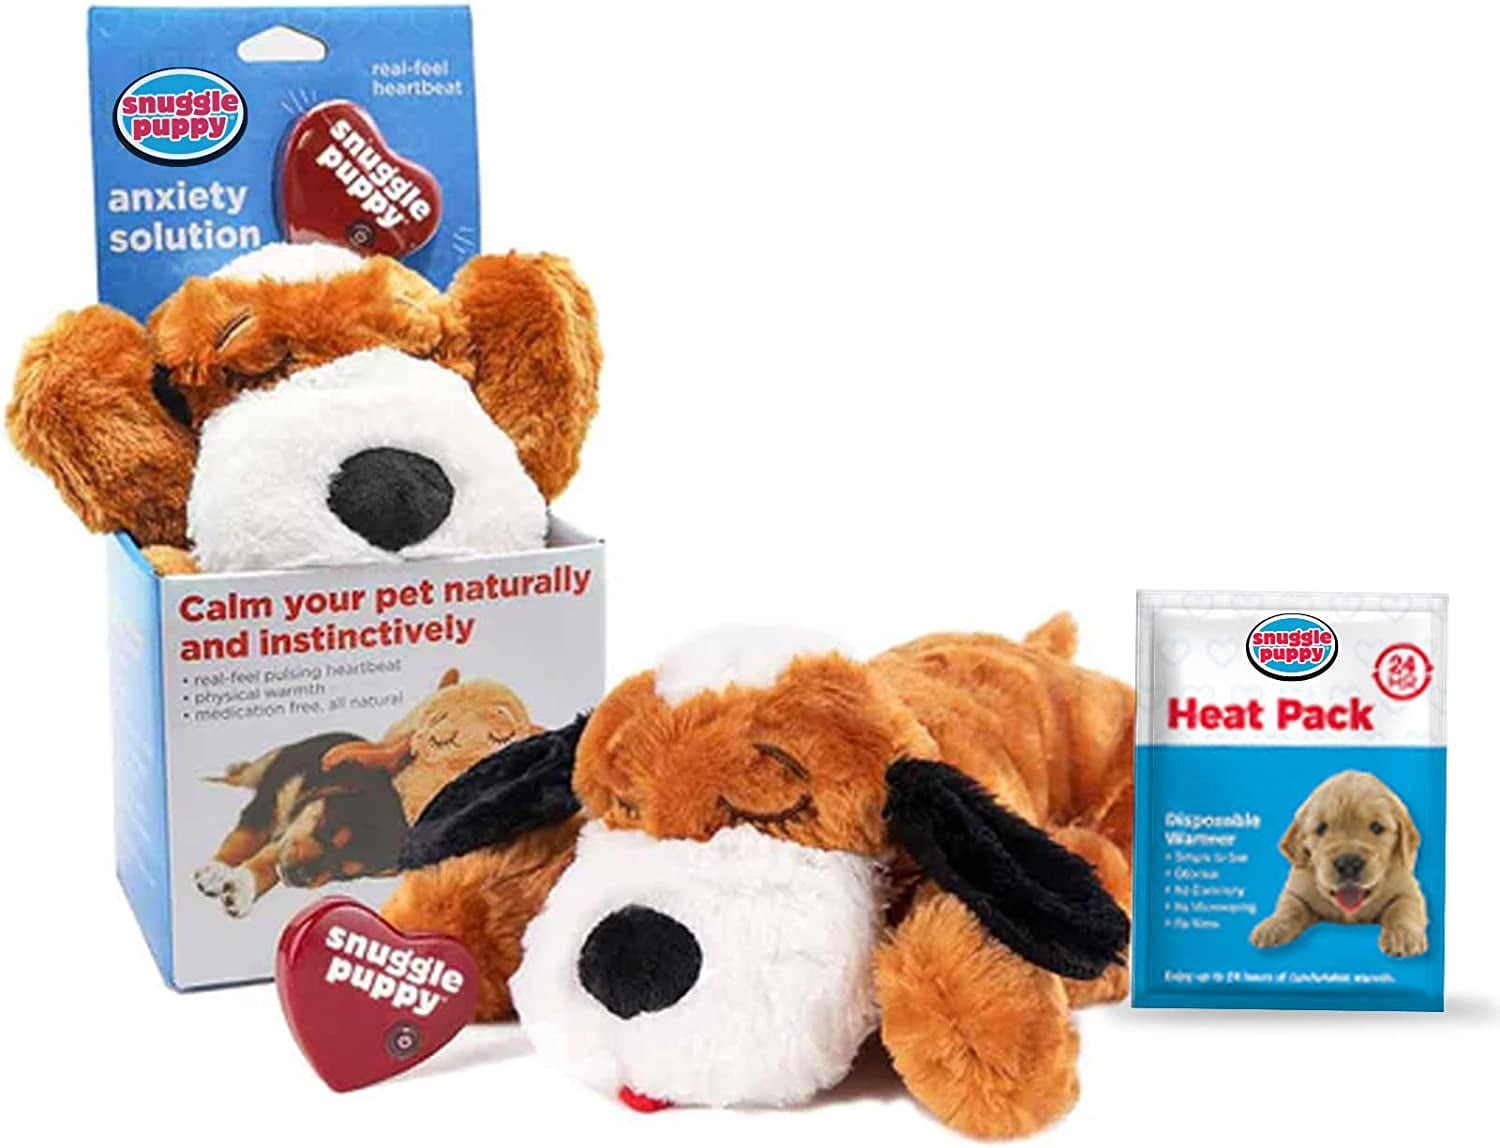 Original Snuggle Puppy Heartbeat Stuffed Toy for Dogs - Pet